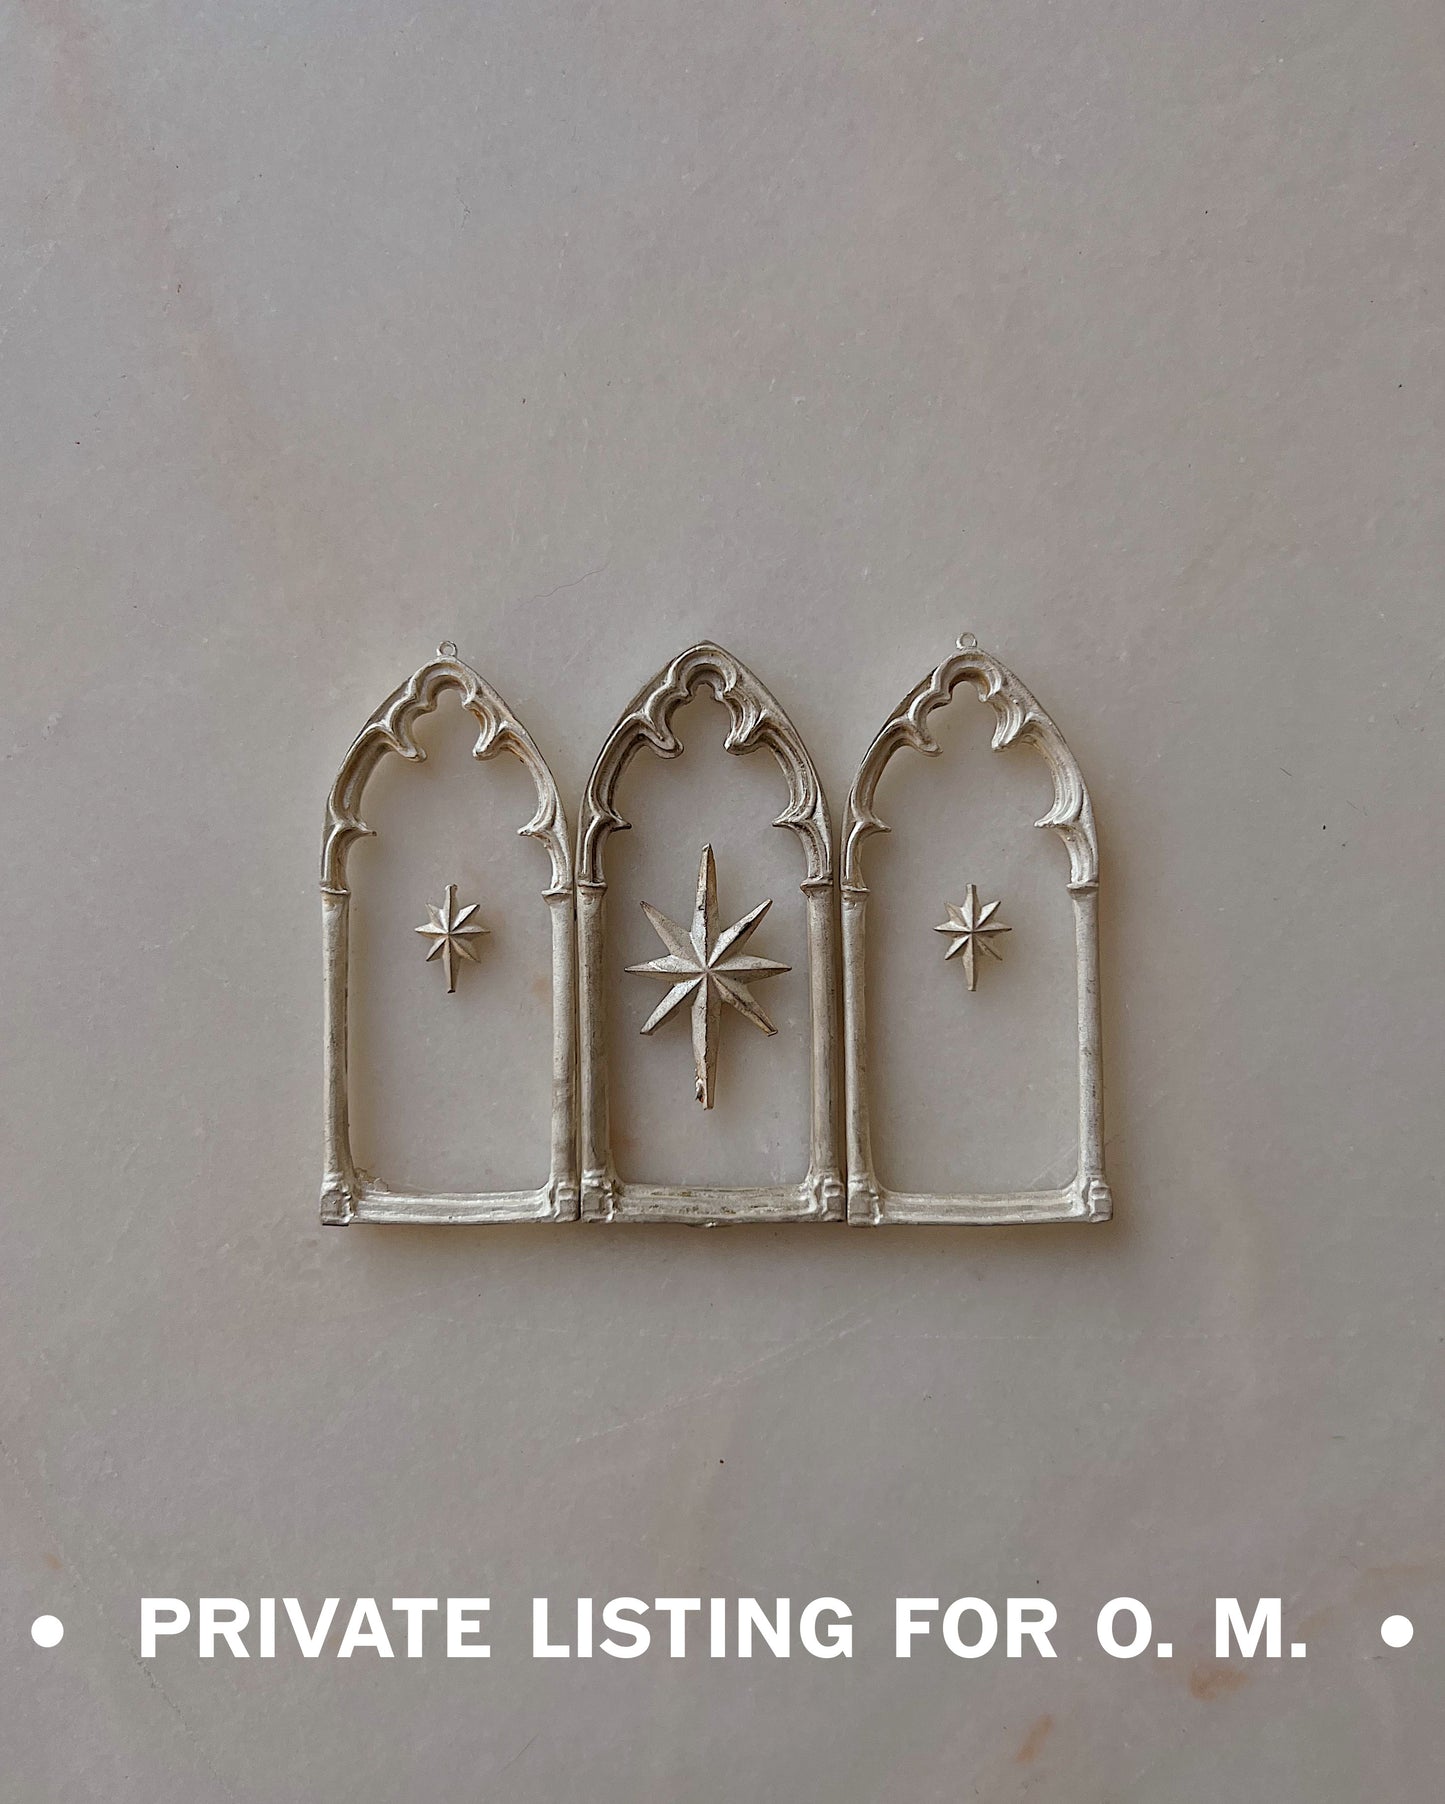 Private Listing For O.M.